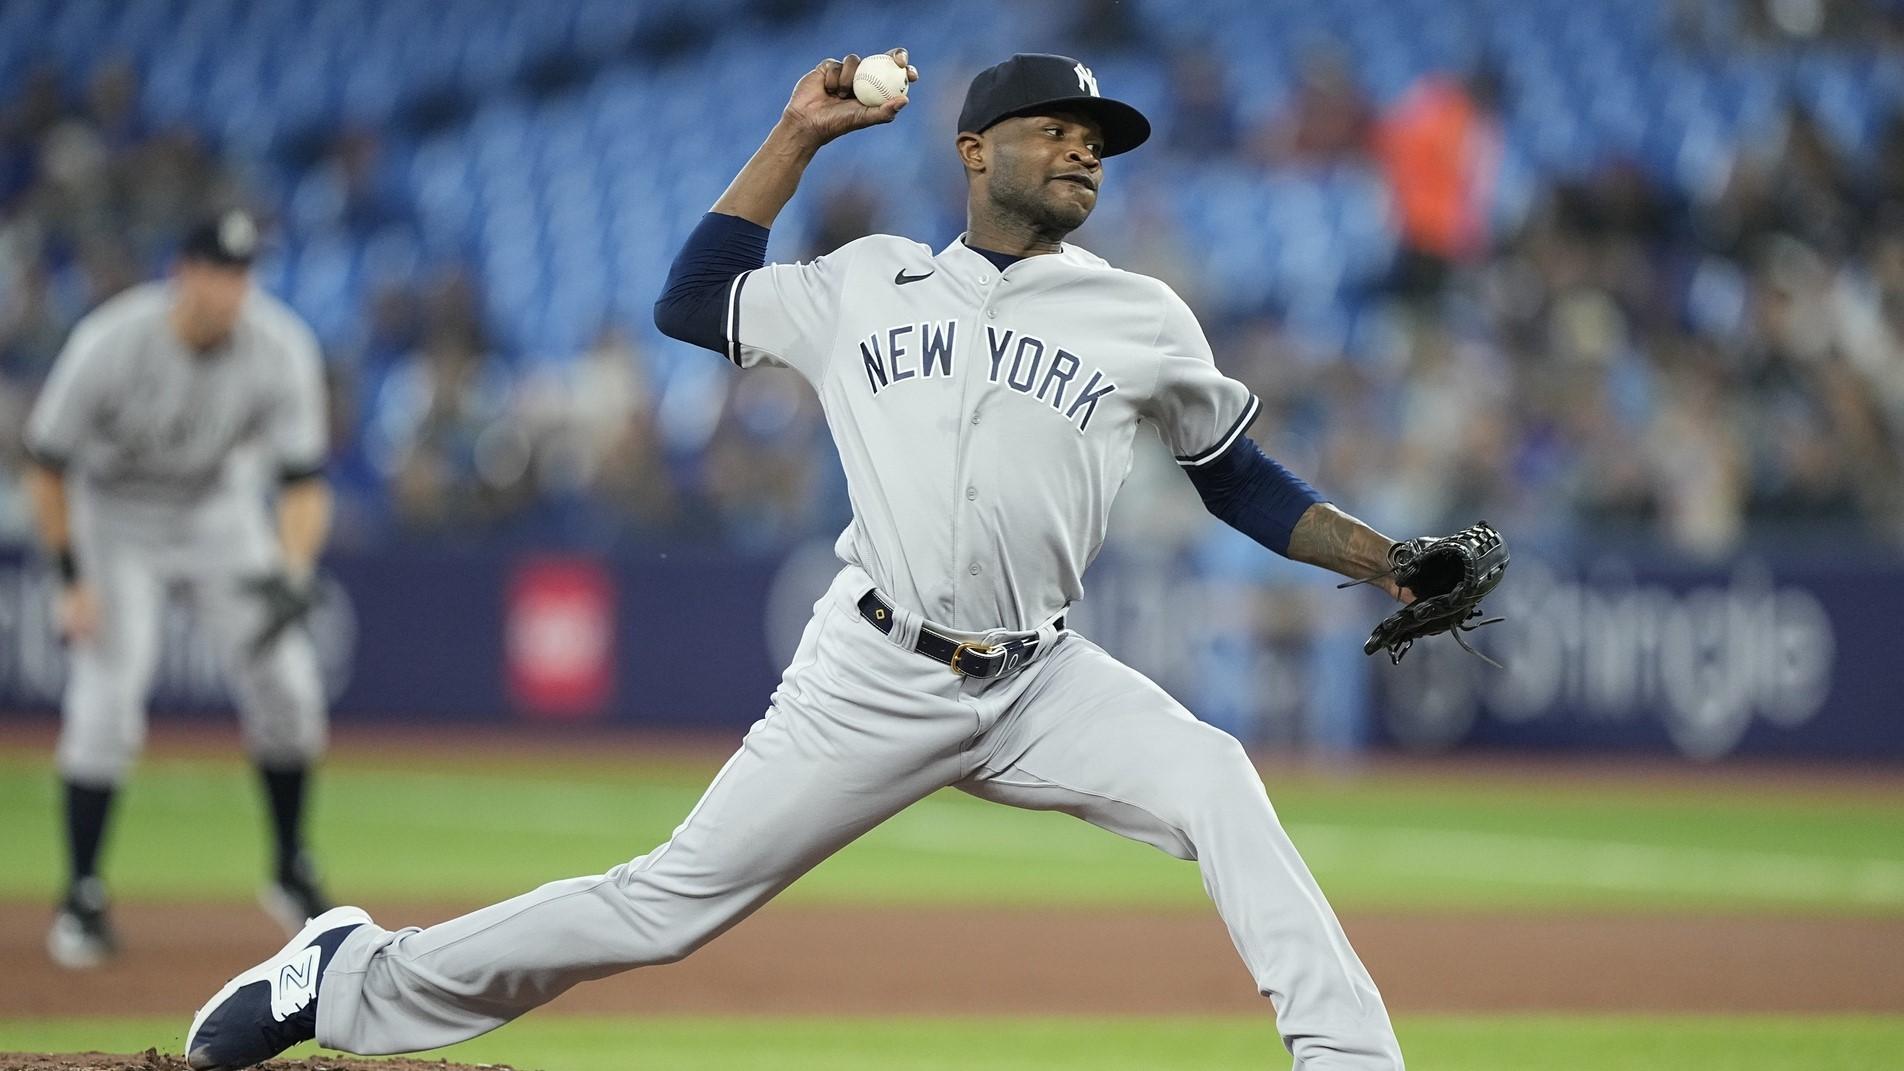 May 16, 2023; Toronto, Ontario, CAN; New York Yankees starting pitcher Domingo German (0) pitches to the Toronto Blue Jays during the first inning at Rogers Centre. / John E. Sokolowski-USA TODAY Sports